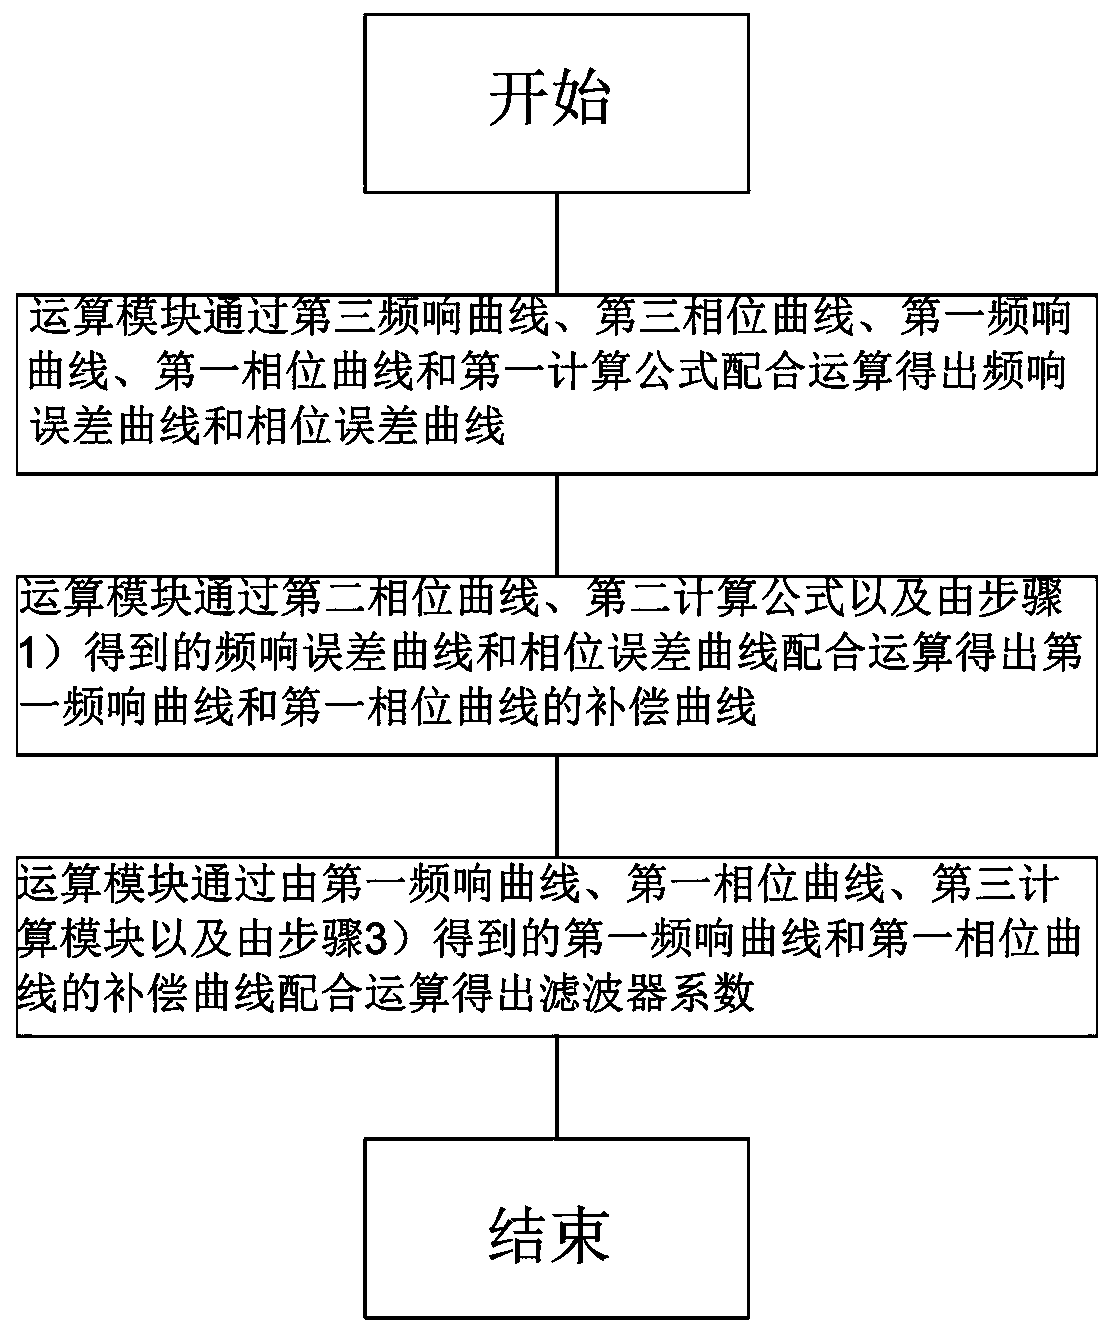 An adaptive ear canal active noise reduction earphone and an adaptive ear canal active noise reduction method